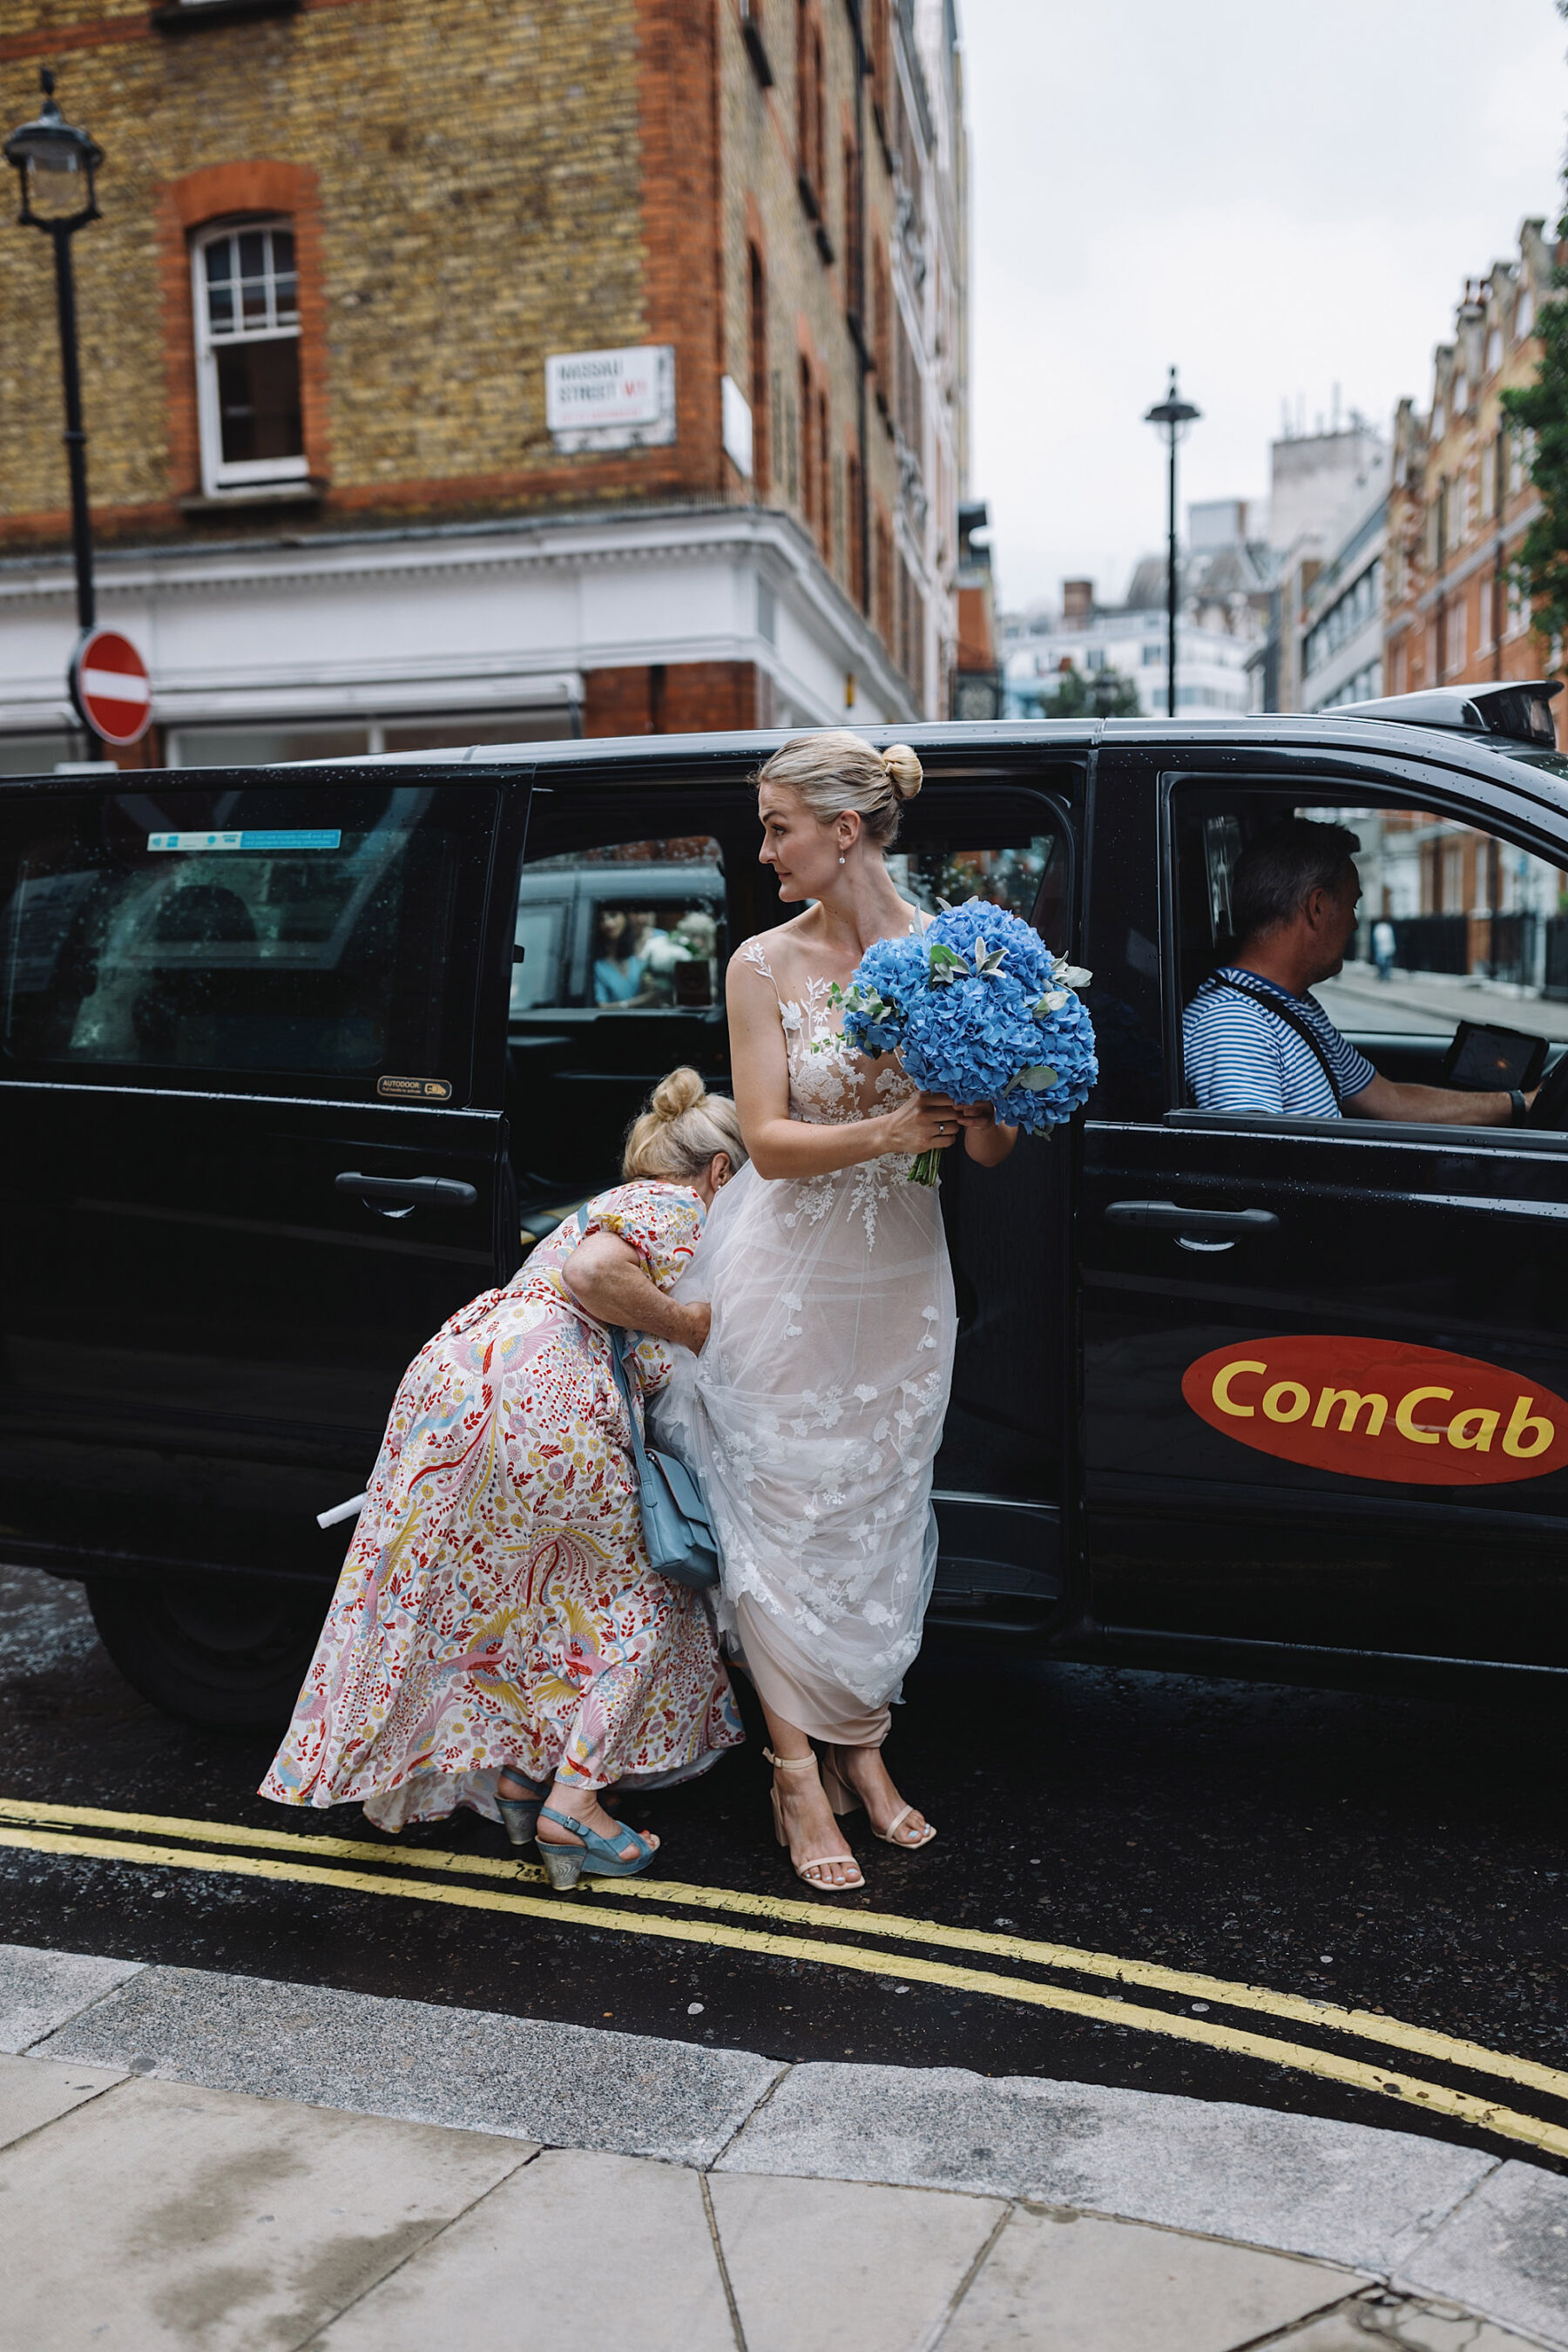 Large blue hydrangea wedding bouquet. Bride getting out of a London black cab taxi. Wolf & Co. Photography